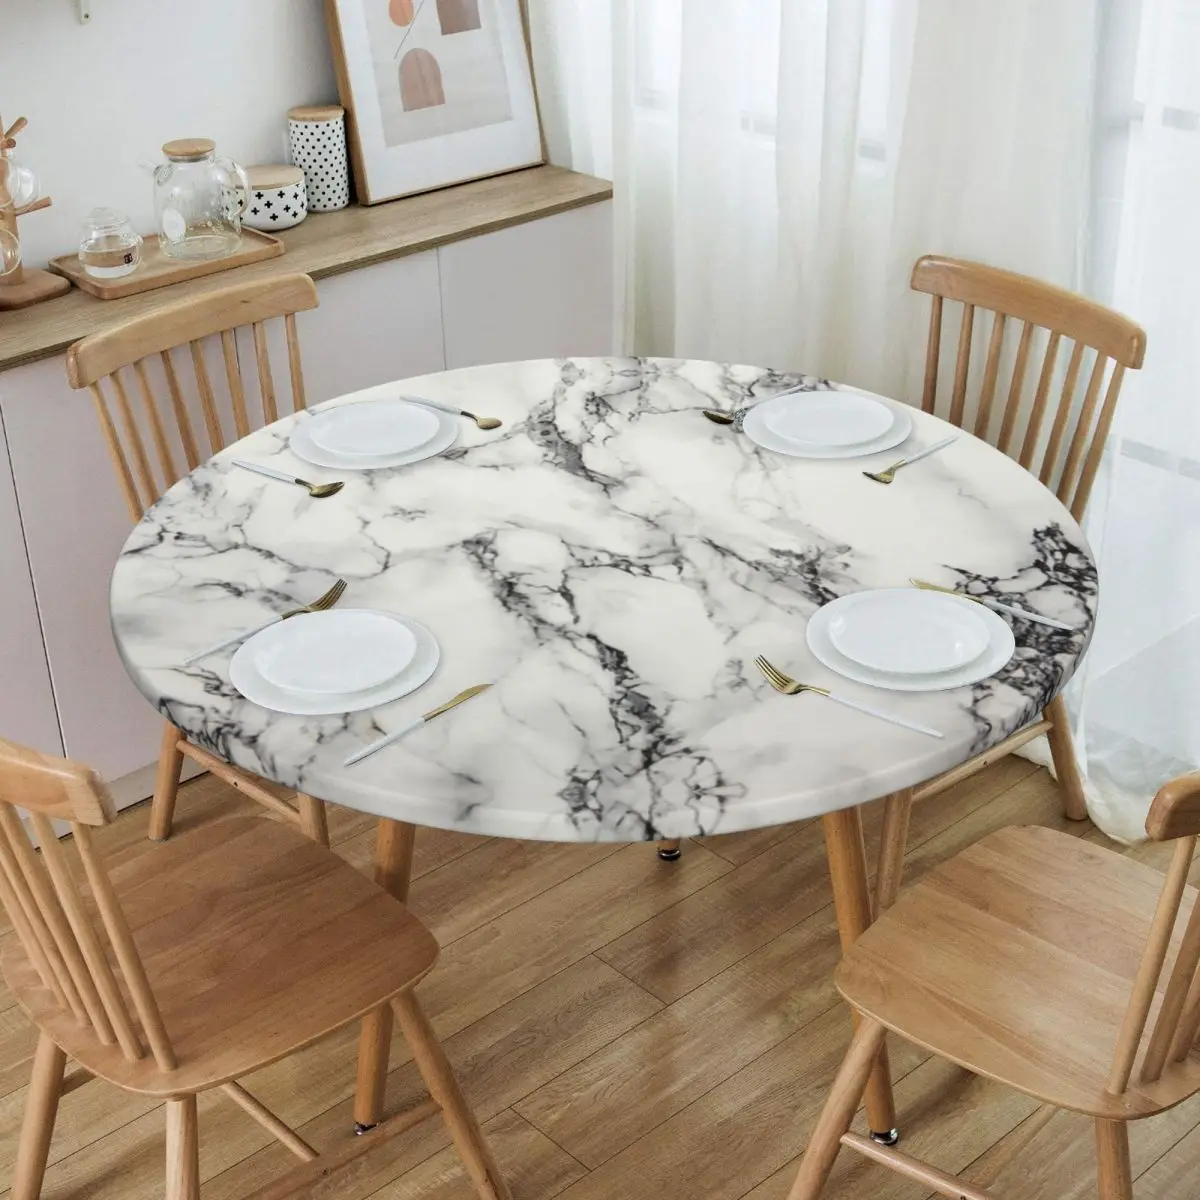 Round Oilproof White Marble Texture Table Cover Fitted Abstract Art Table Cloth Backing Edge Tablecloth for Dining